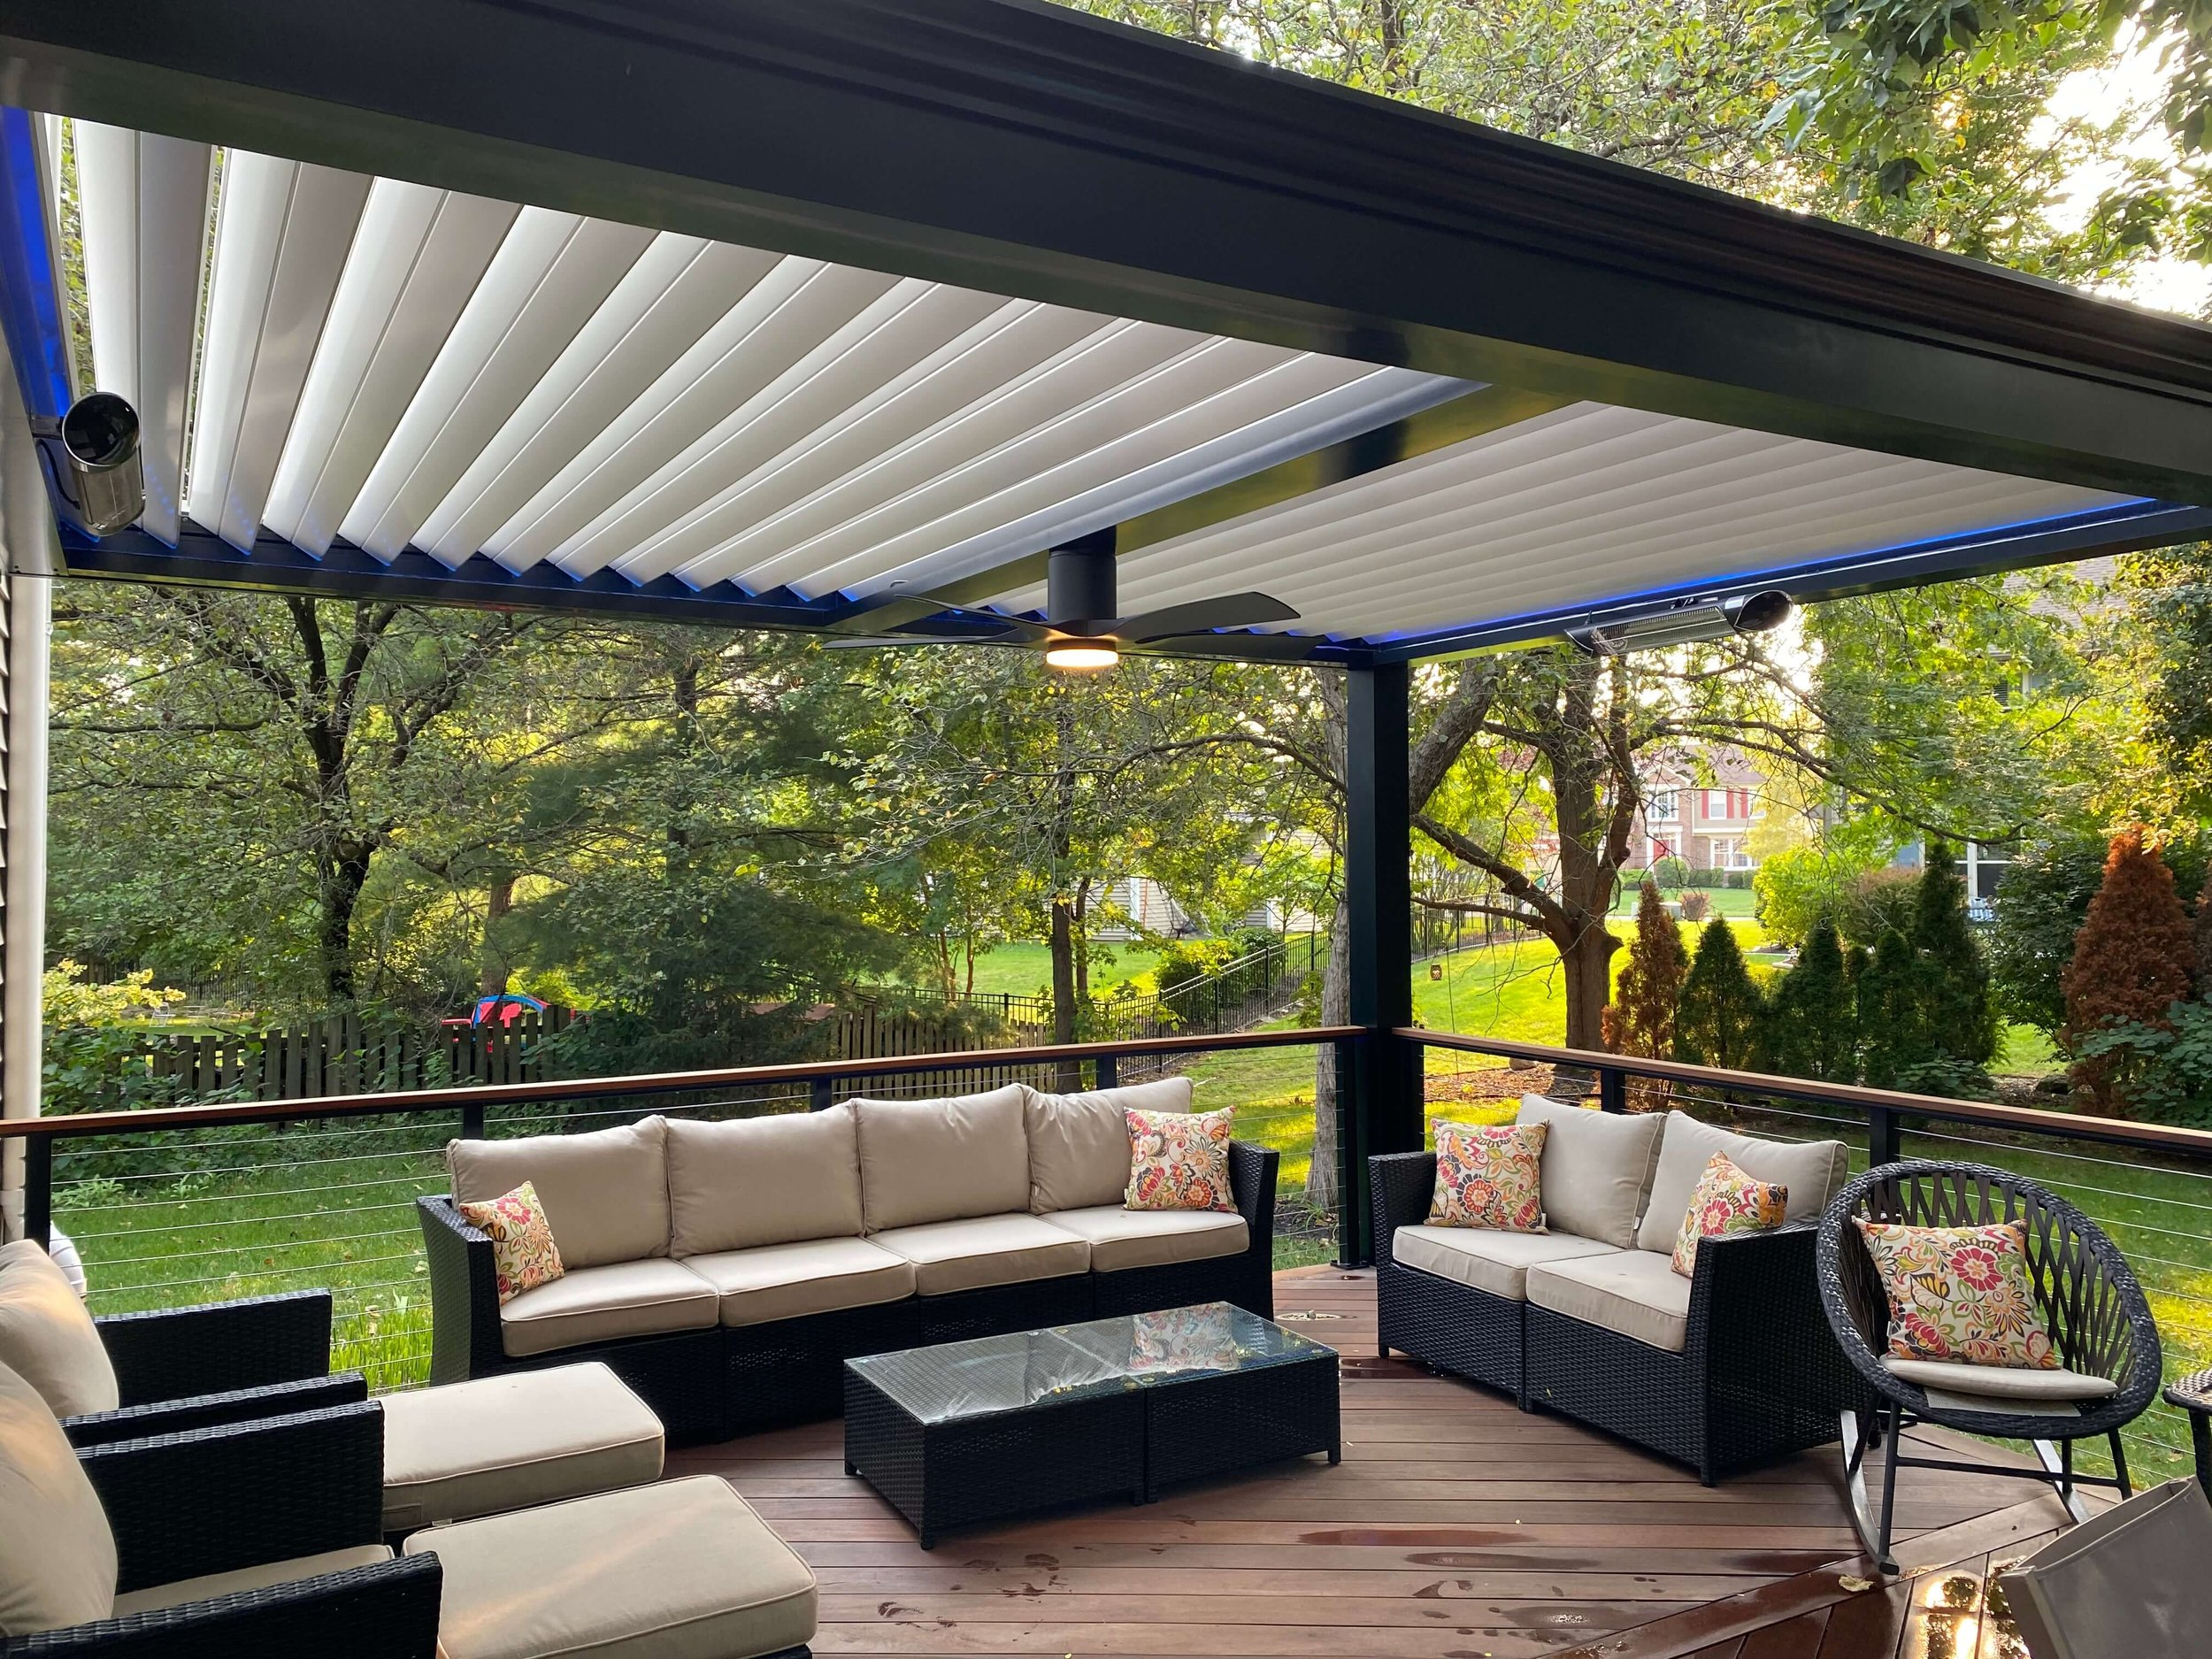 Pergola in back patio with wooden deck